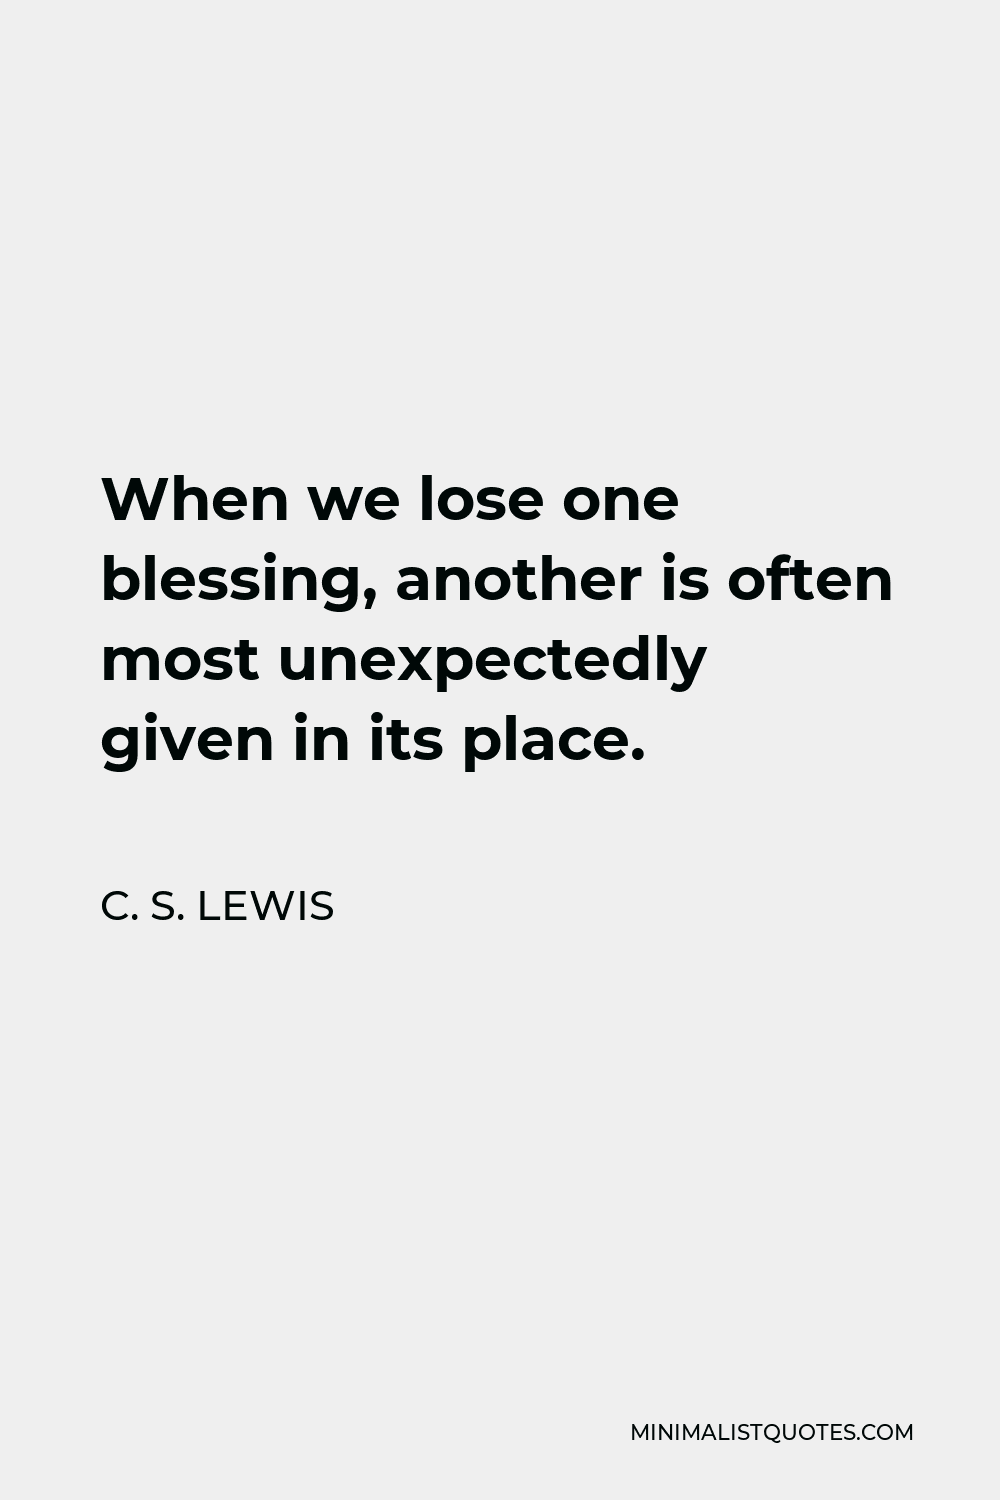 C. S. Lewis Quote - When we lose one blessing, another is often most unexpectedly given in its place.